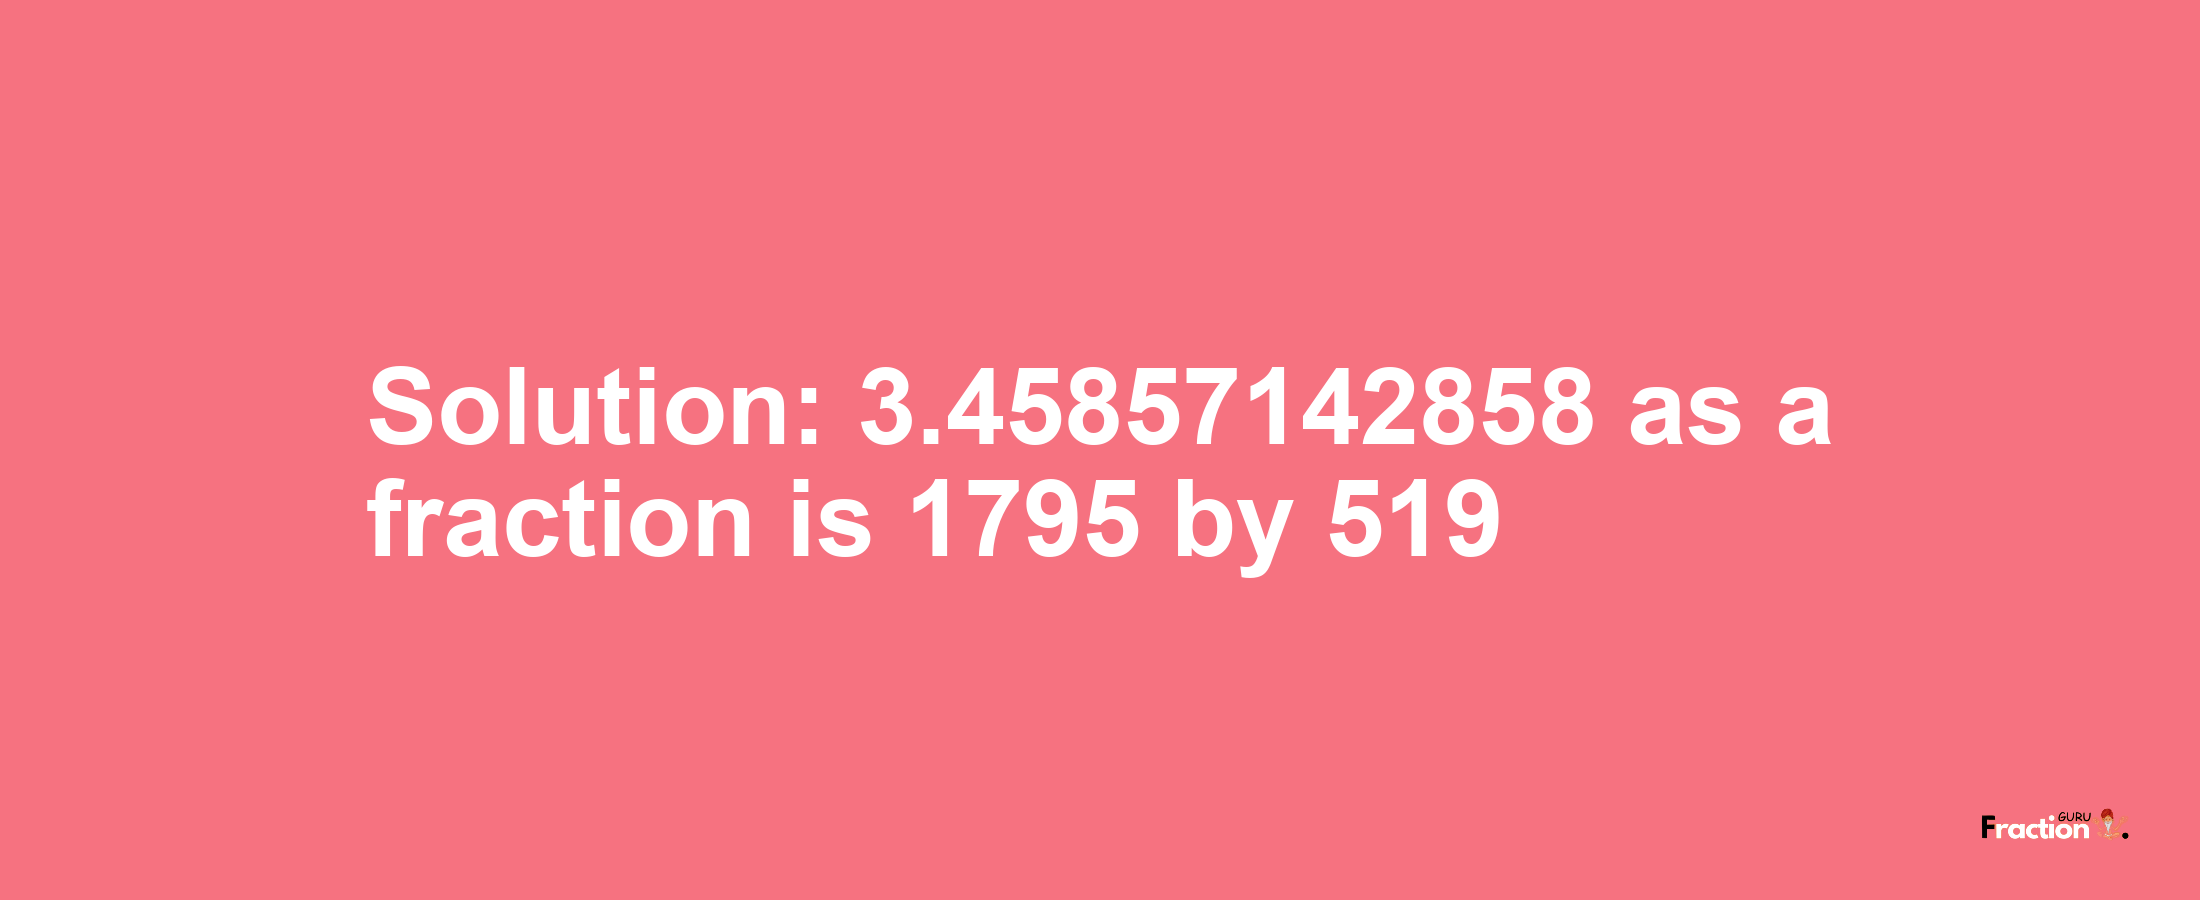 Solution:3.45857142858 as a fraction is 1795/519